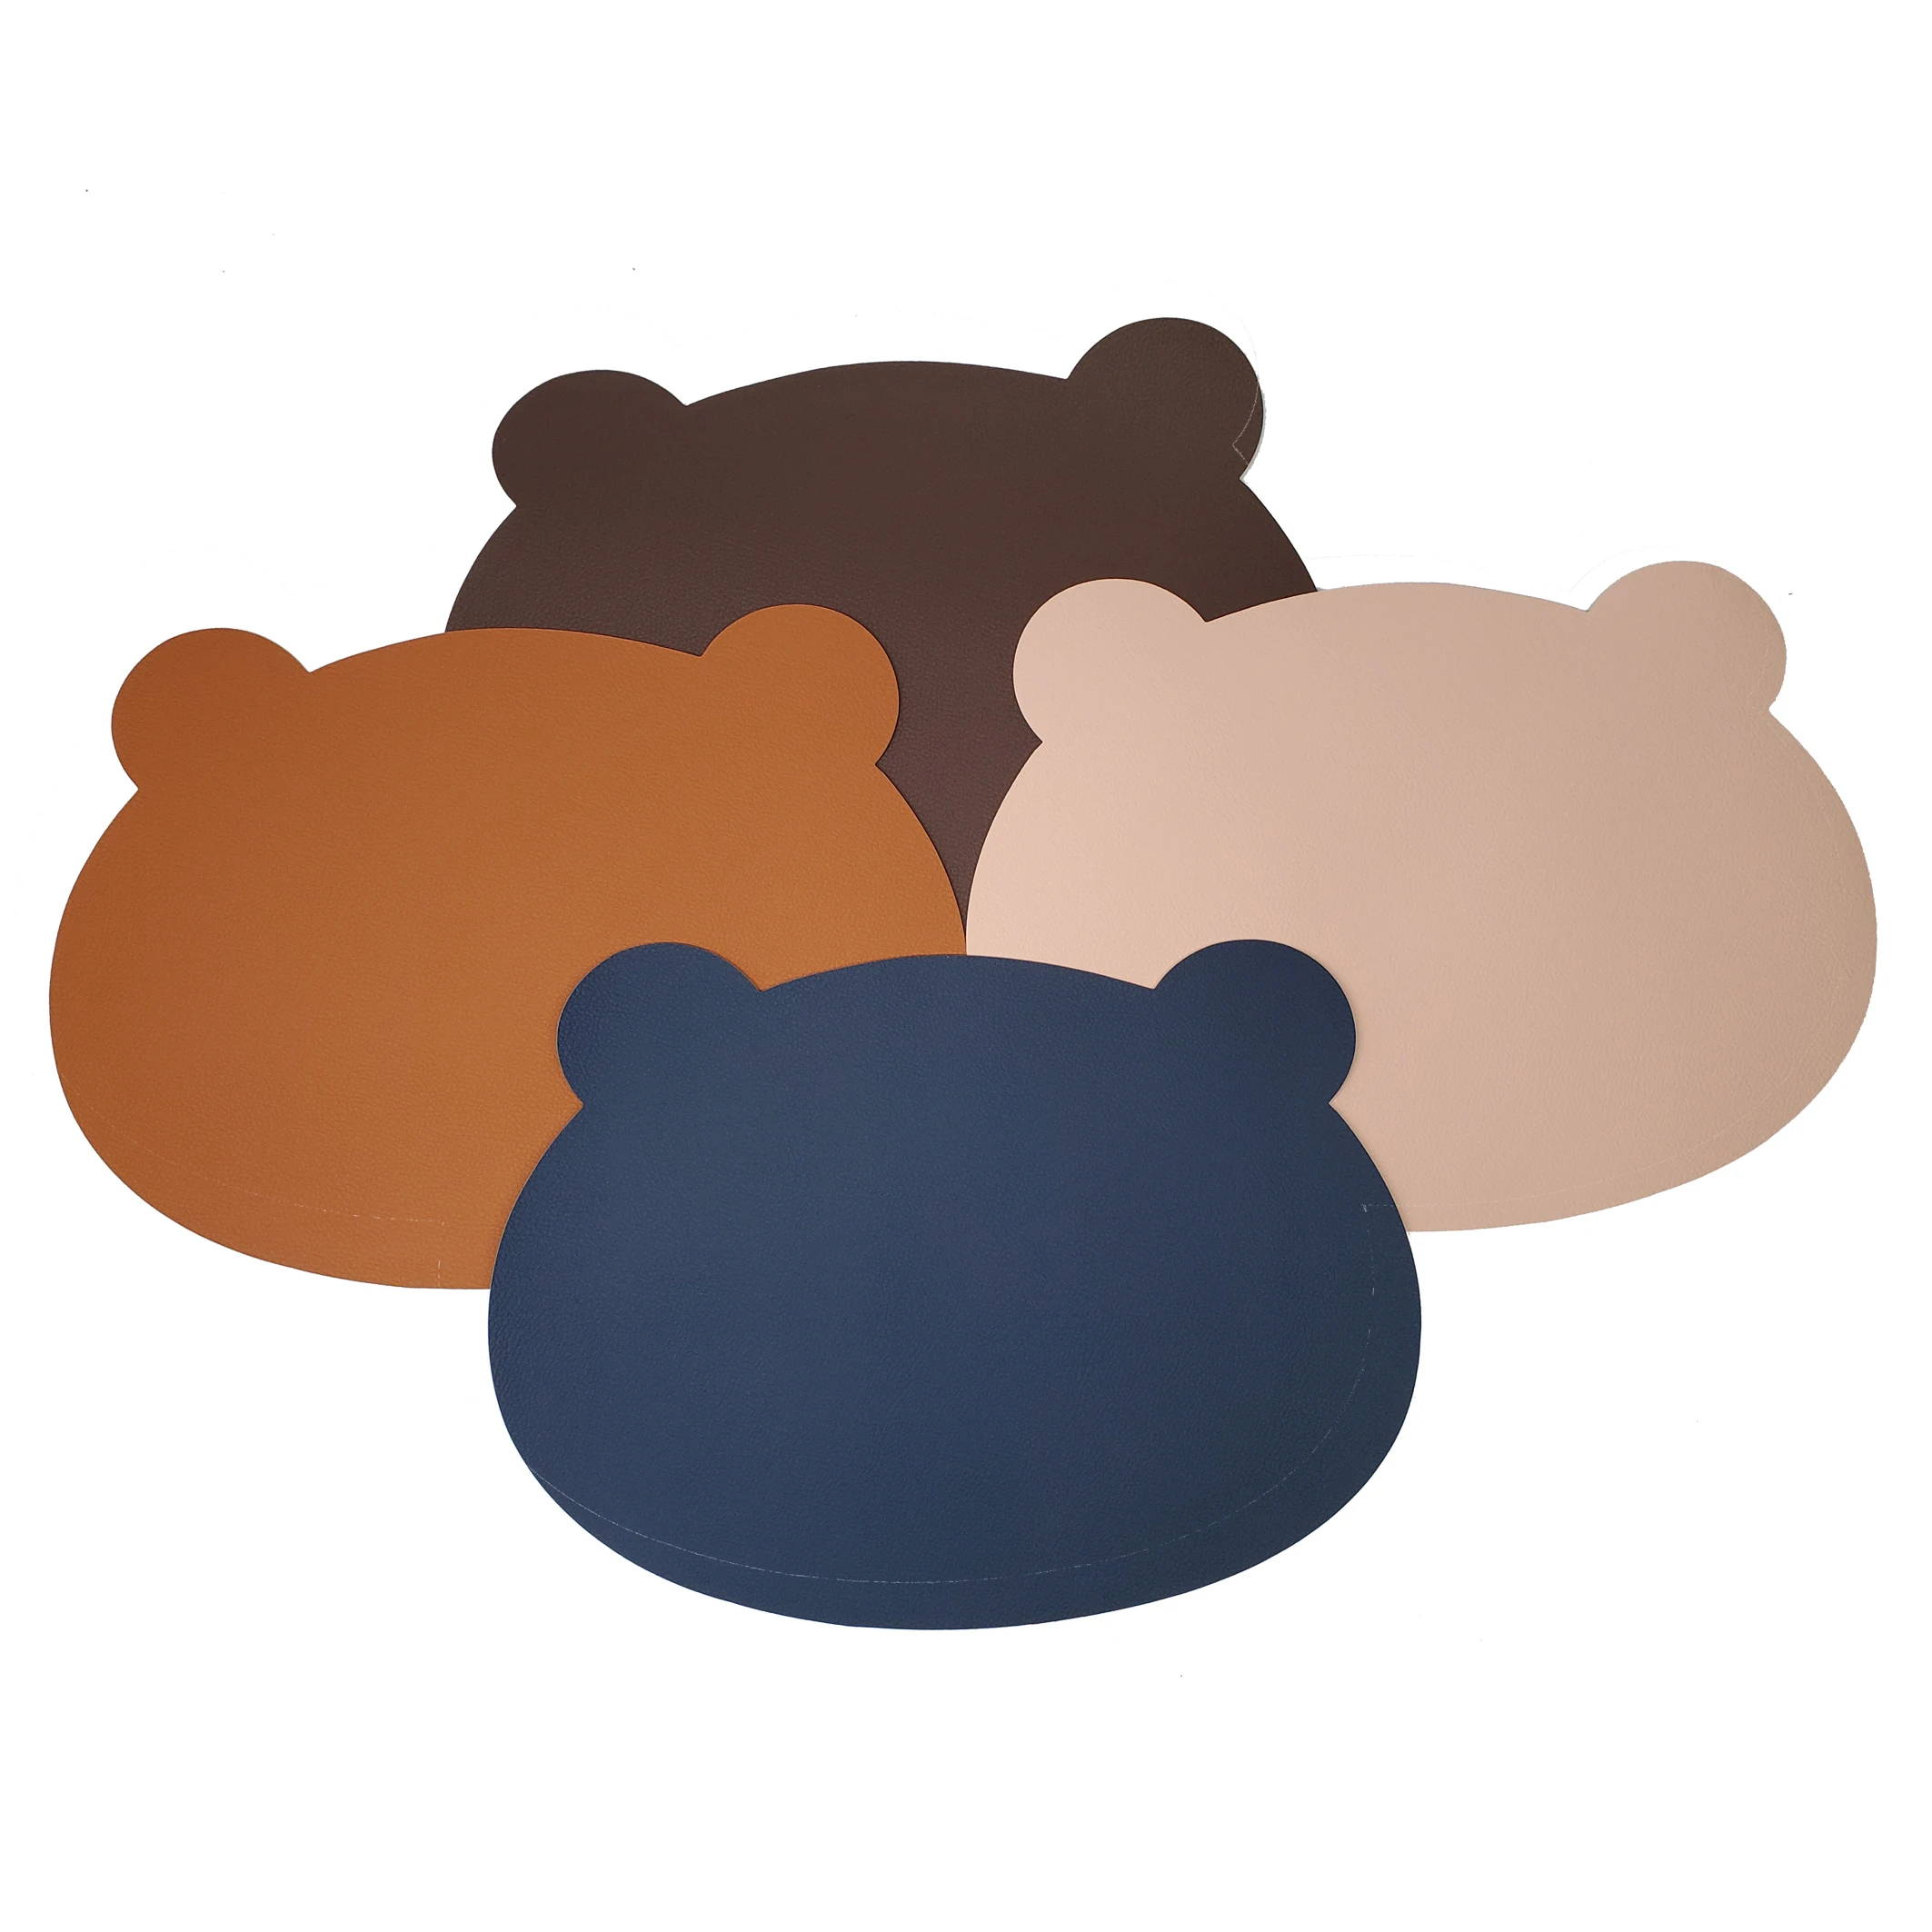 

Tabletex 2022 NEW Arrival hot sell PVC leather placemat Food Grade Bear Shaped Children's Table Mat, Pink+dark grey,brown+black,white+coffee,blue+grey